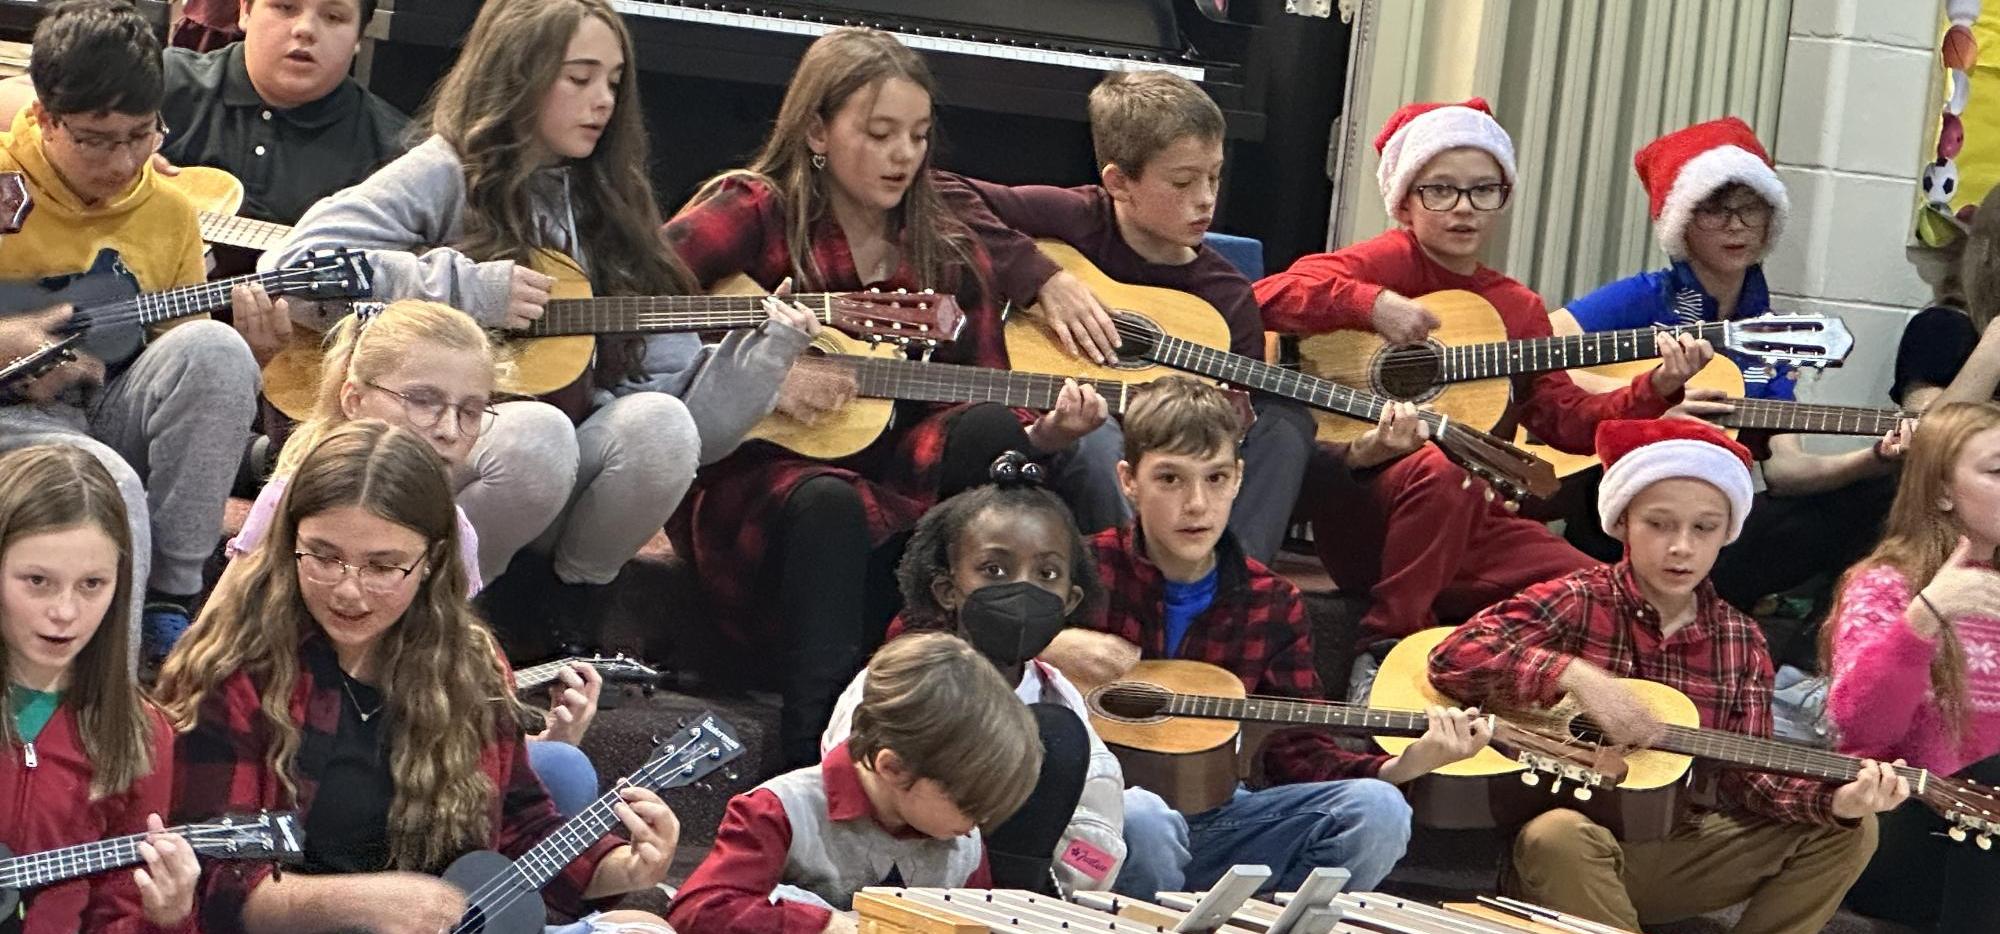 children sitting on steps playing guitars and ukeleles